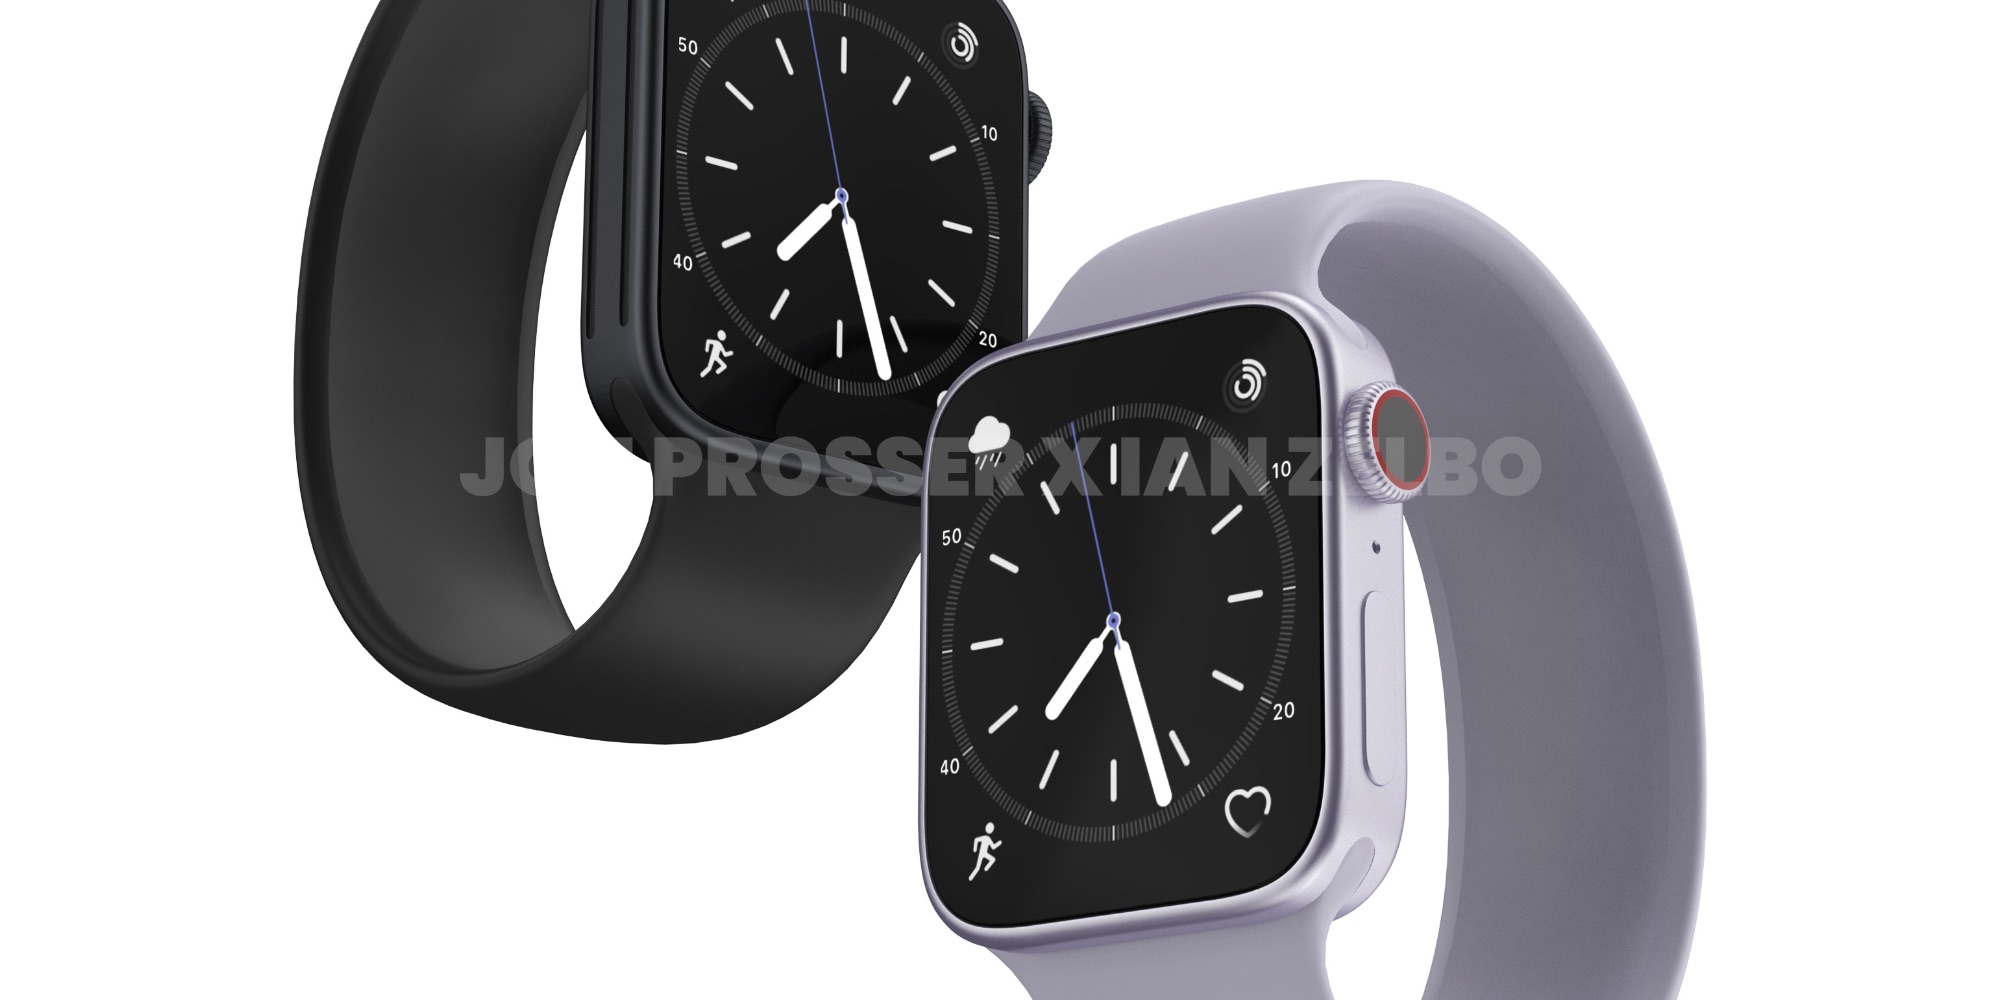 Apple Watch glass rumor revives flat-edge design for Series 8 or other models